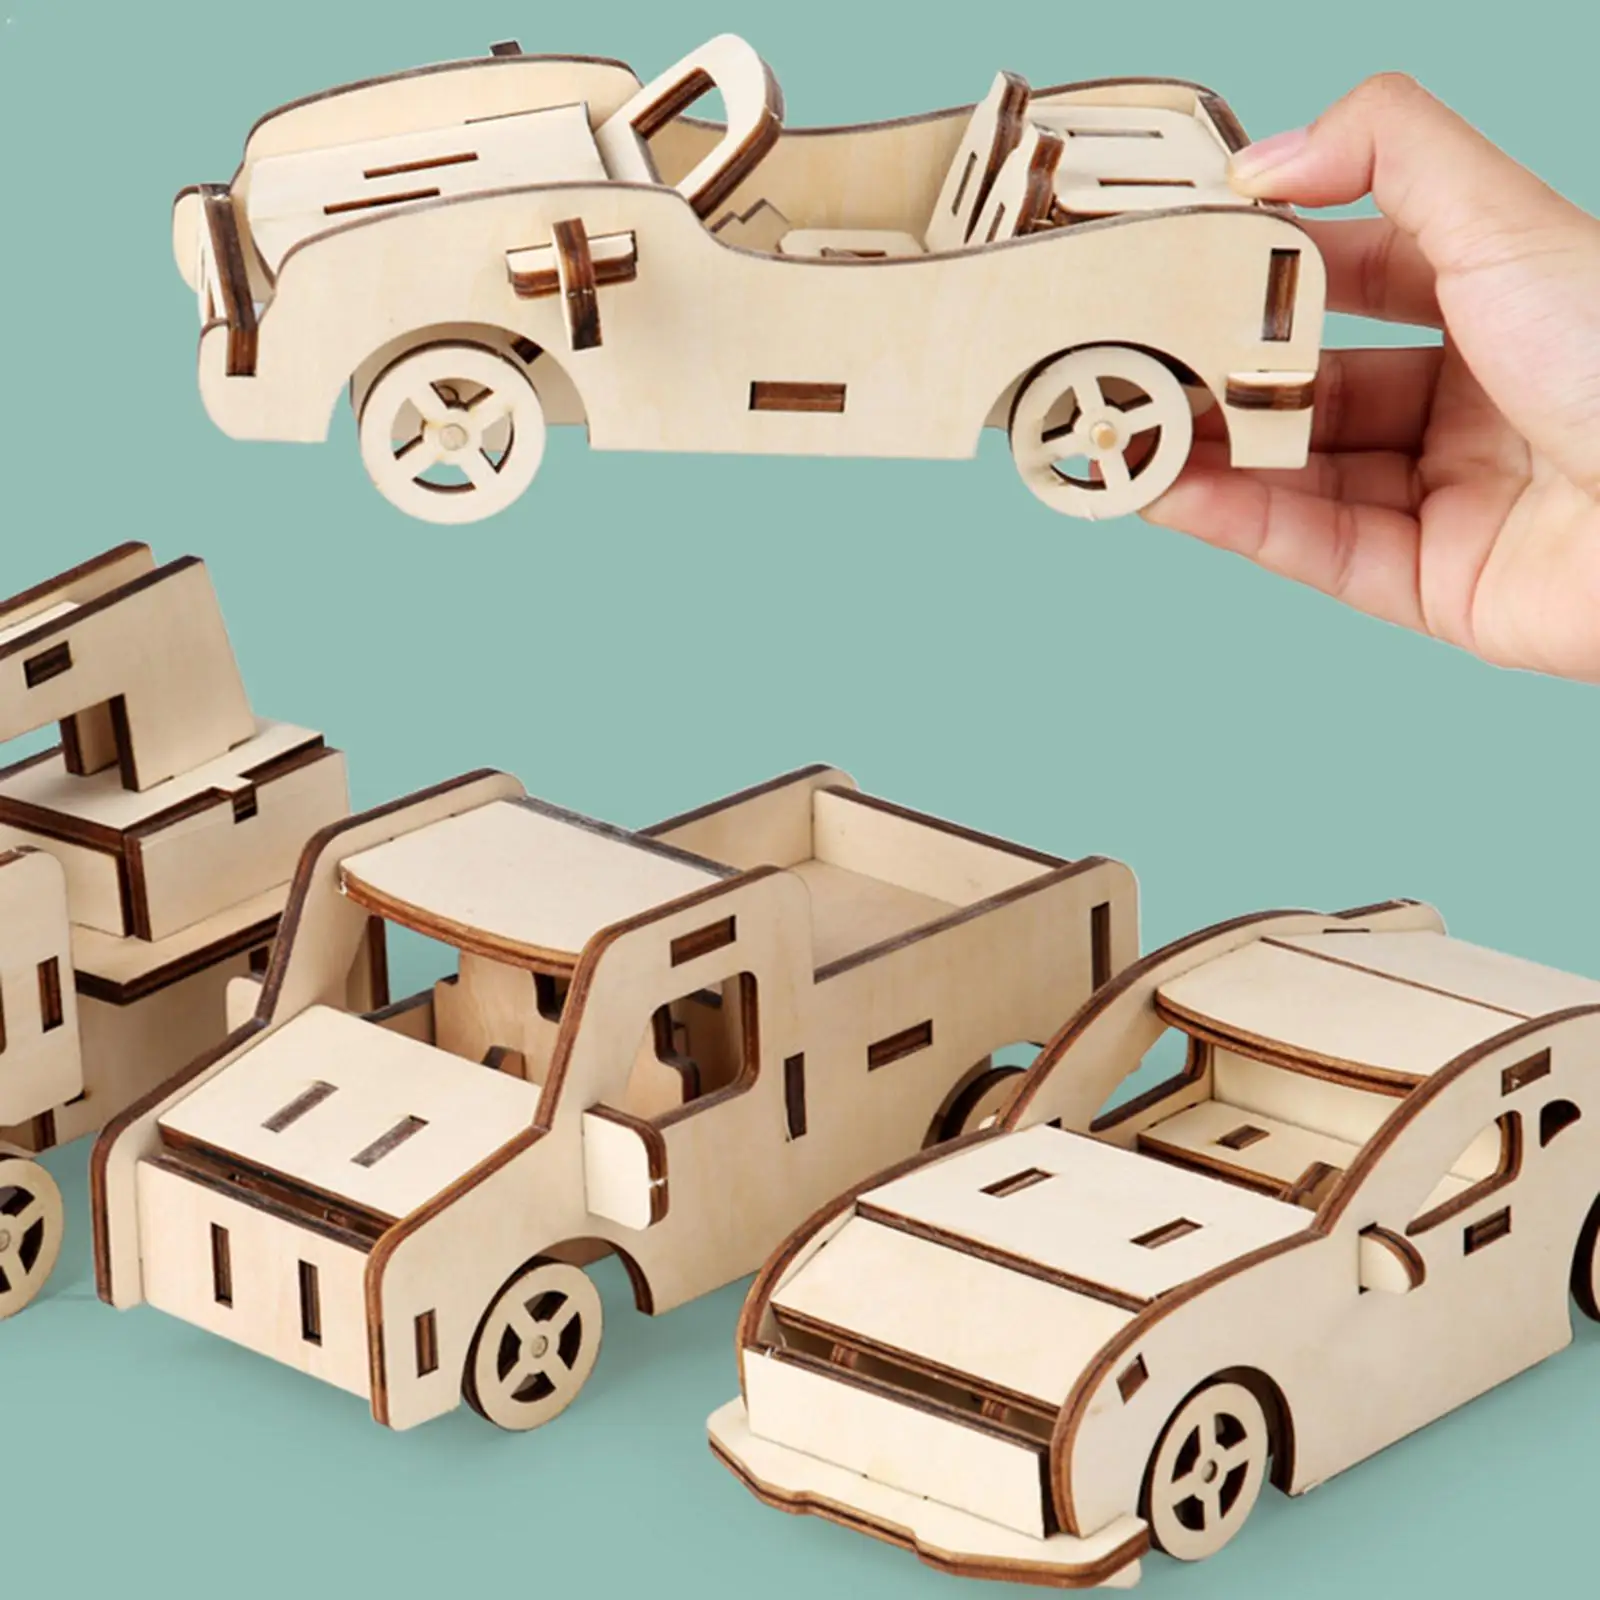 3D Wooden Puzzles Creative DIY Toy Model Building Kit Gift Jigsaw Wooden DIY Toys Unique for childrens Birthday Party Teens